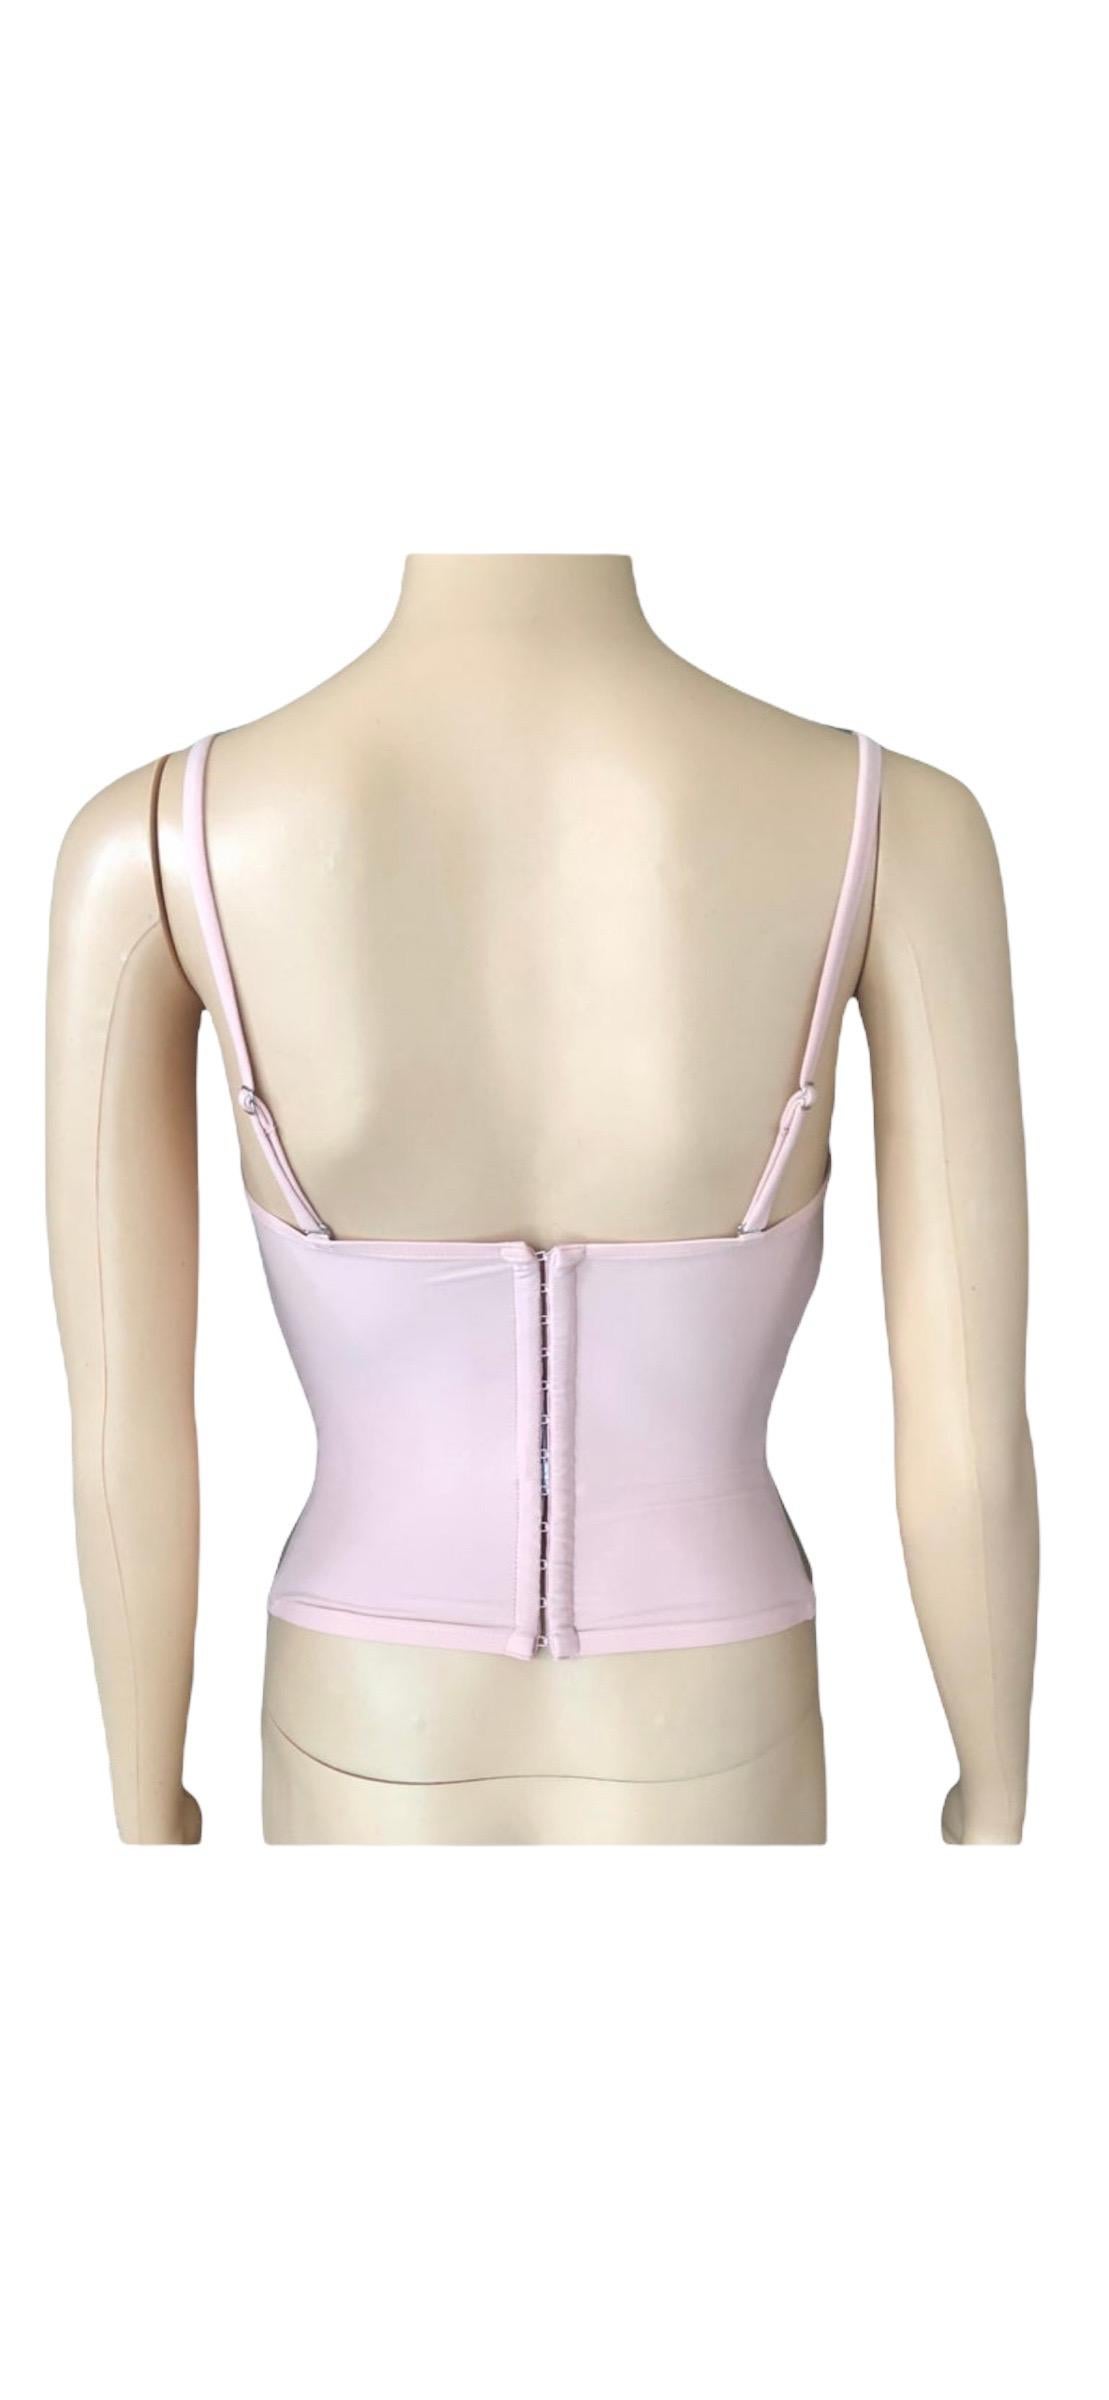 Christian Dior By John Galliano S/S 2006 Unworn Bustier Lace Corset Crop Top For Sale 7